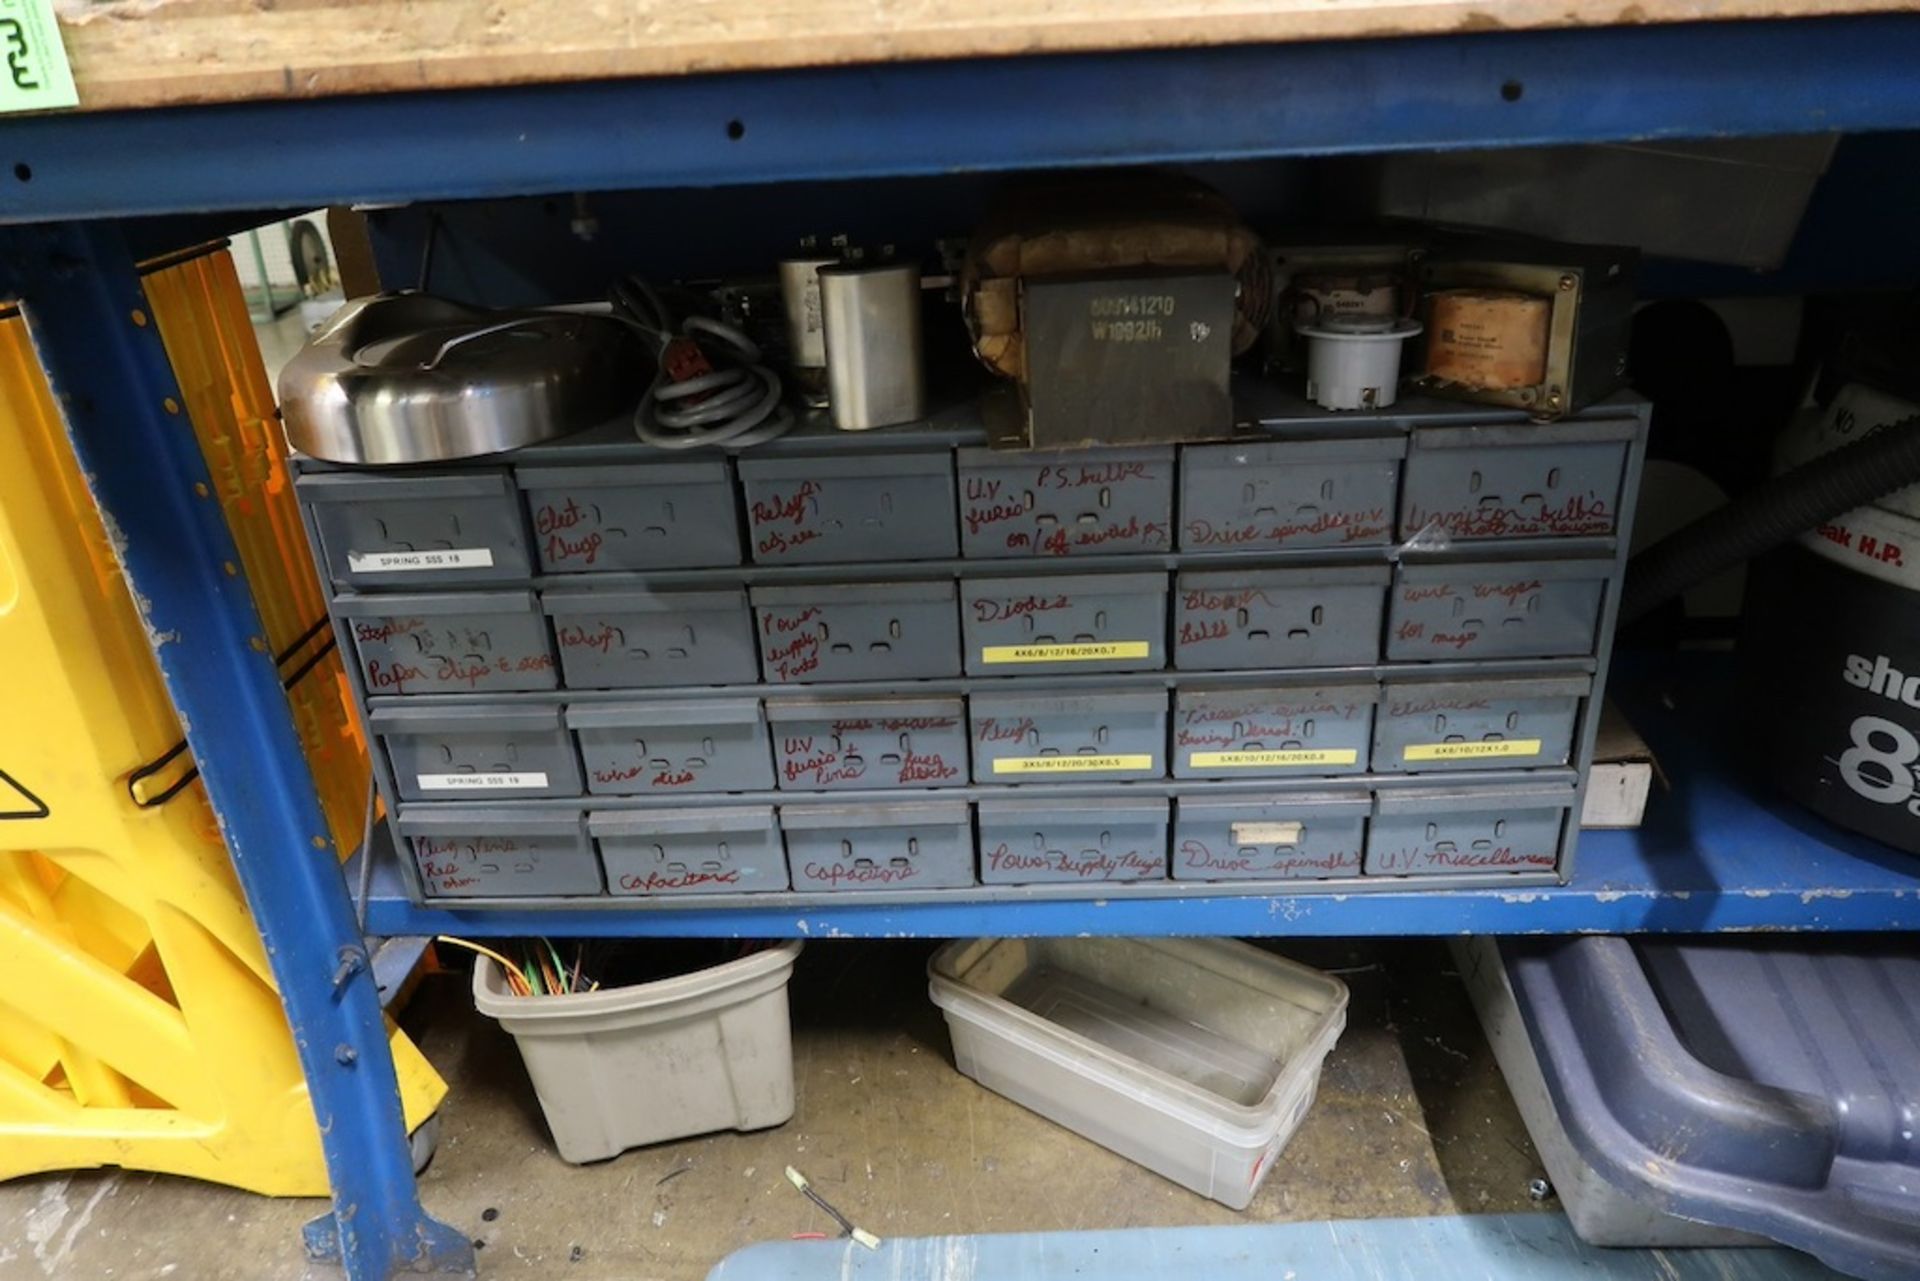 Workbench, Table, 2-Door Cabinets, Parts Organizers and Carts with Misc. Contents - Image 2 of 11